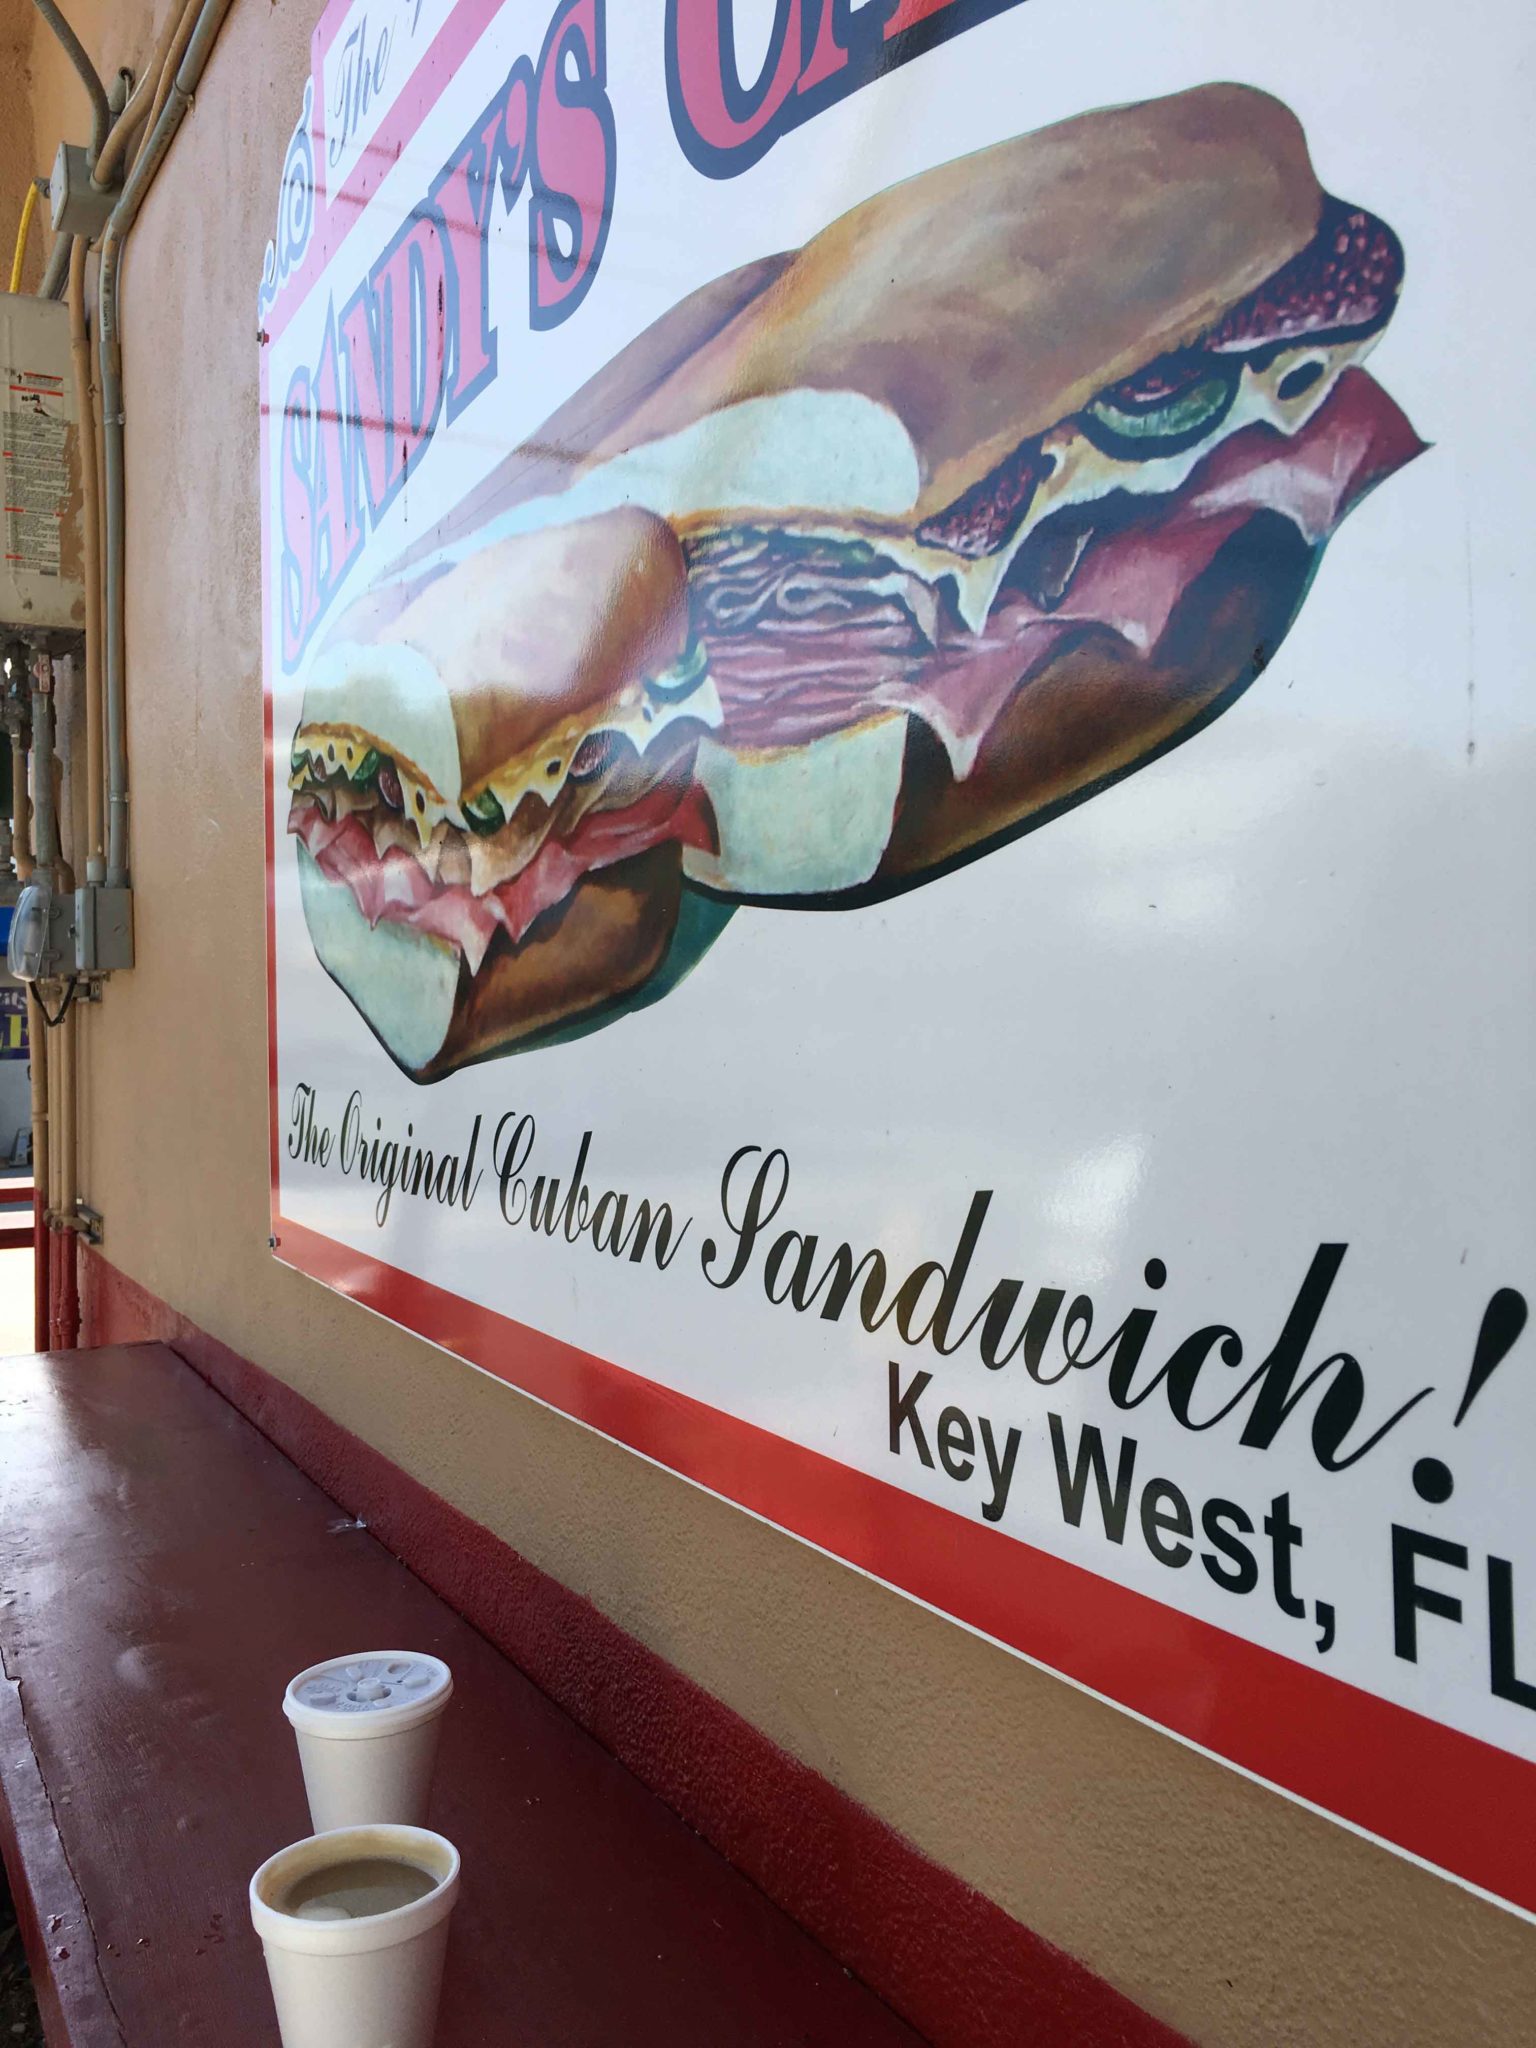 5 Reasons Why you Need to go to Sandy’s Key West